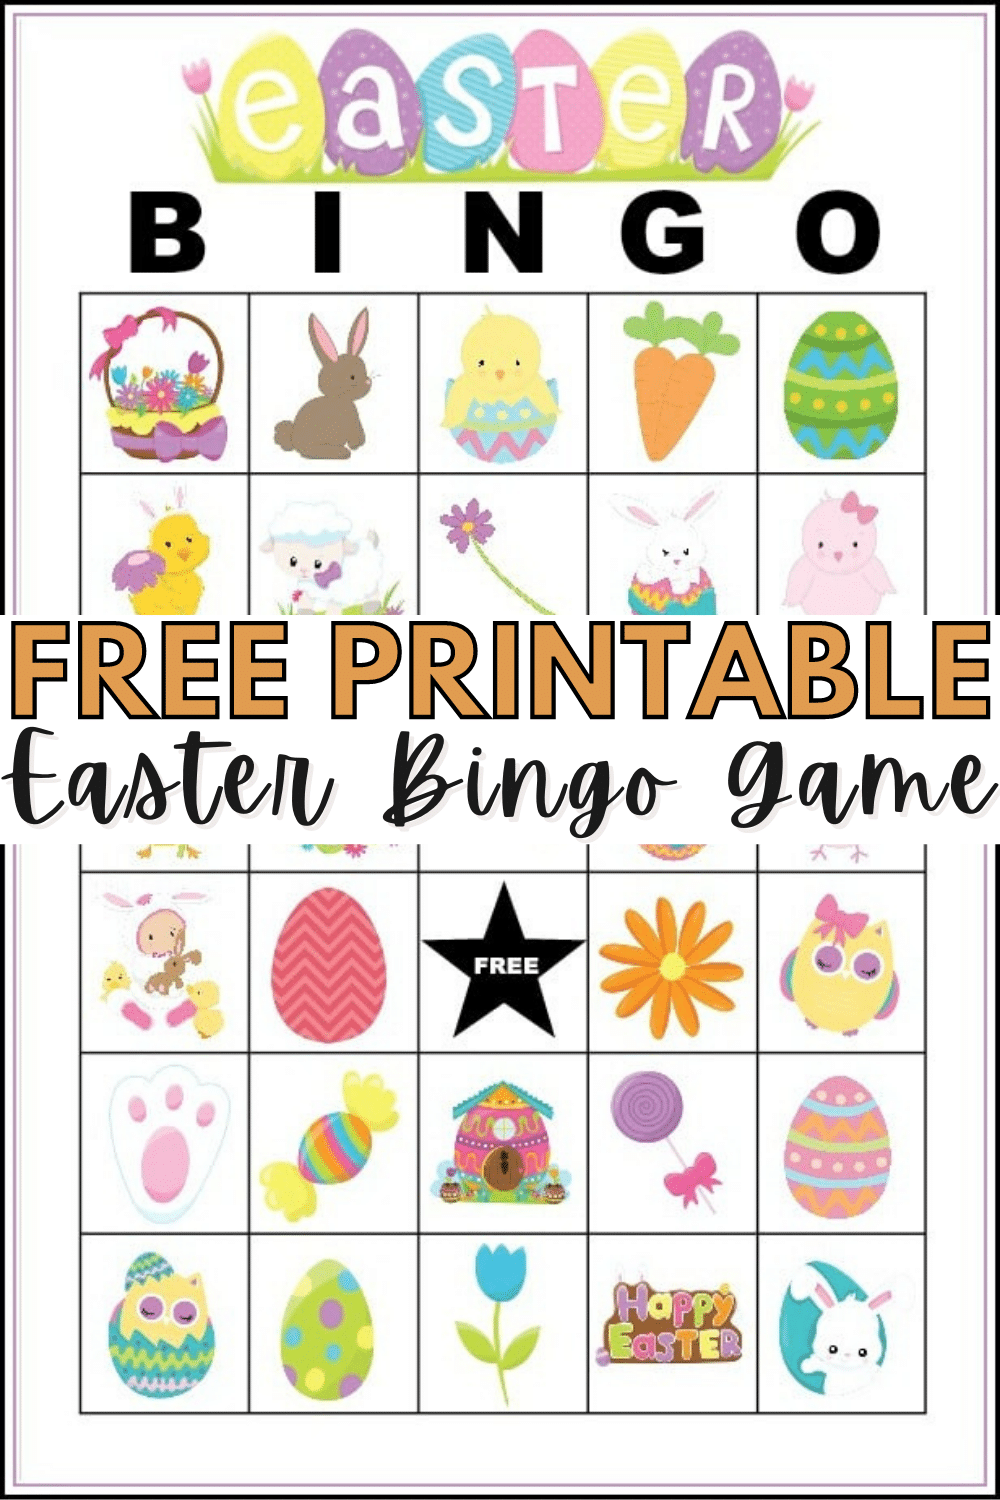 Easter Bingo is a fun game to play during spring. These free printable Easter Bingo cards are colorful and perfect for kids. #printables #freeprintables #easter #bingo via @wondermomwannab